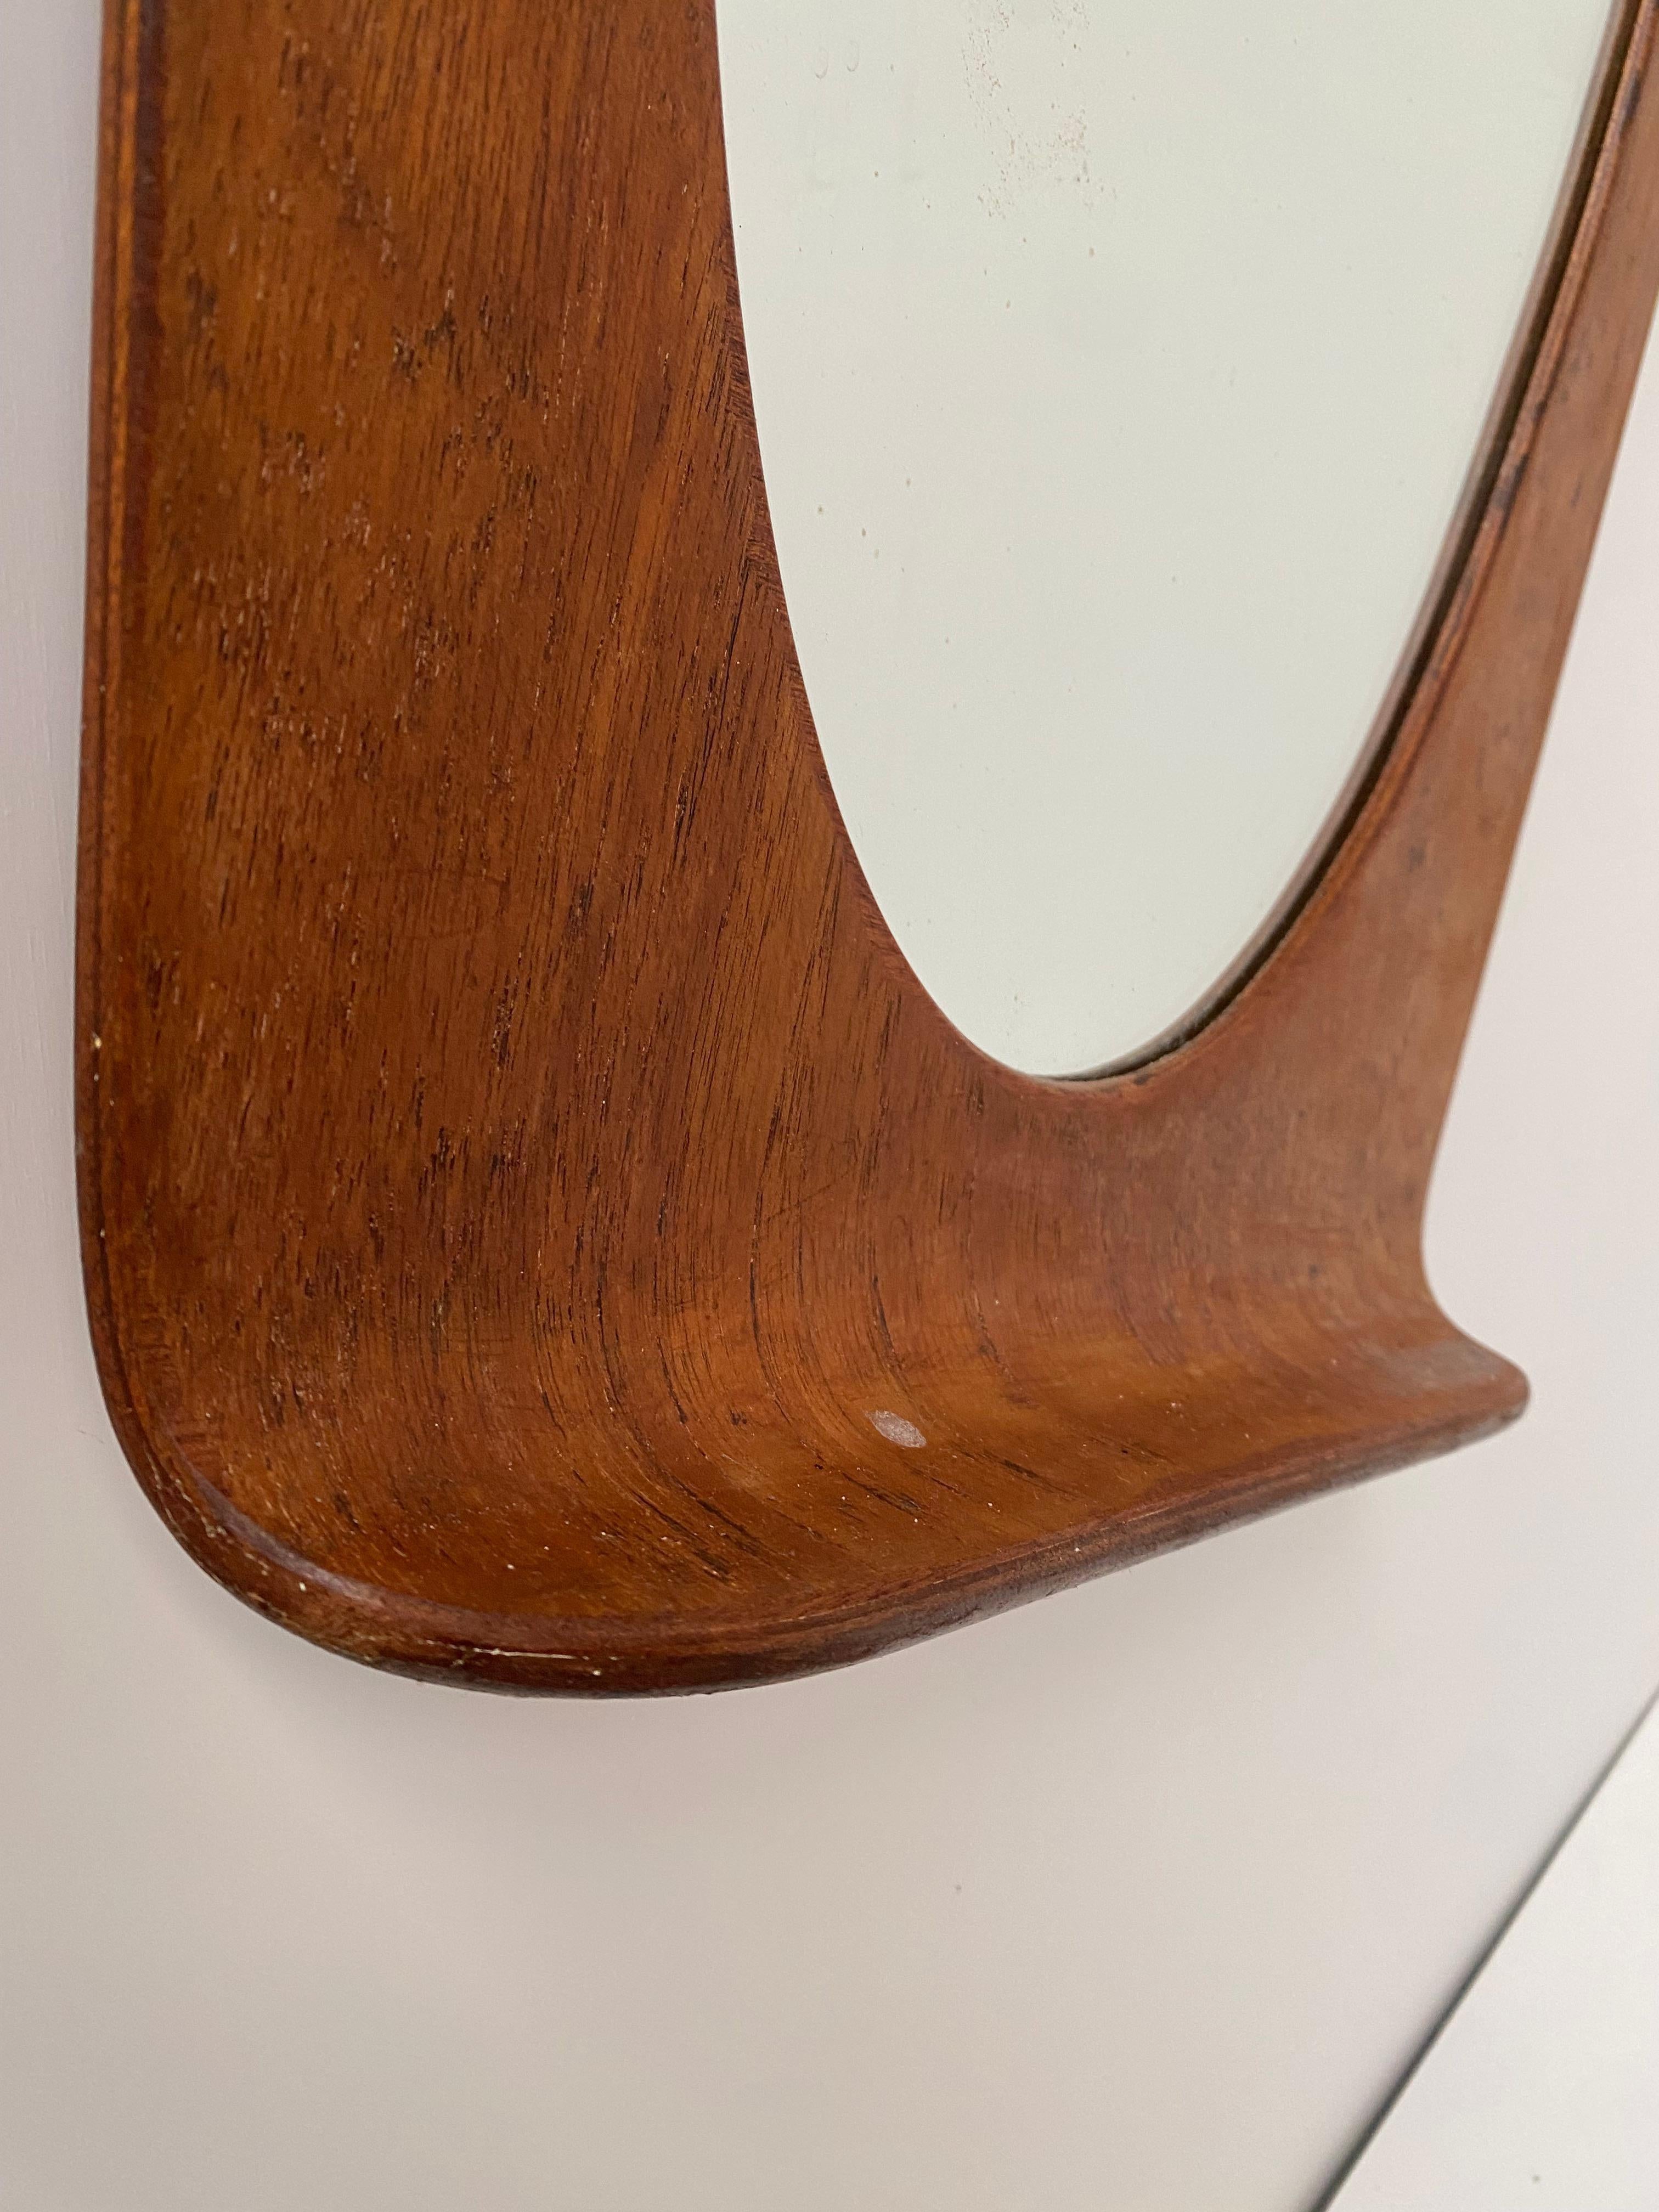 Campo & Graffi Wallmounted Teak Plywood Mirror for HOME Italy 1950's For Sale 1